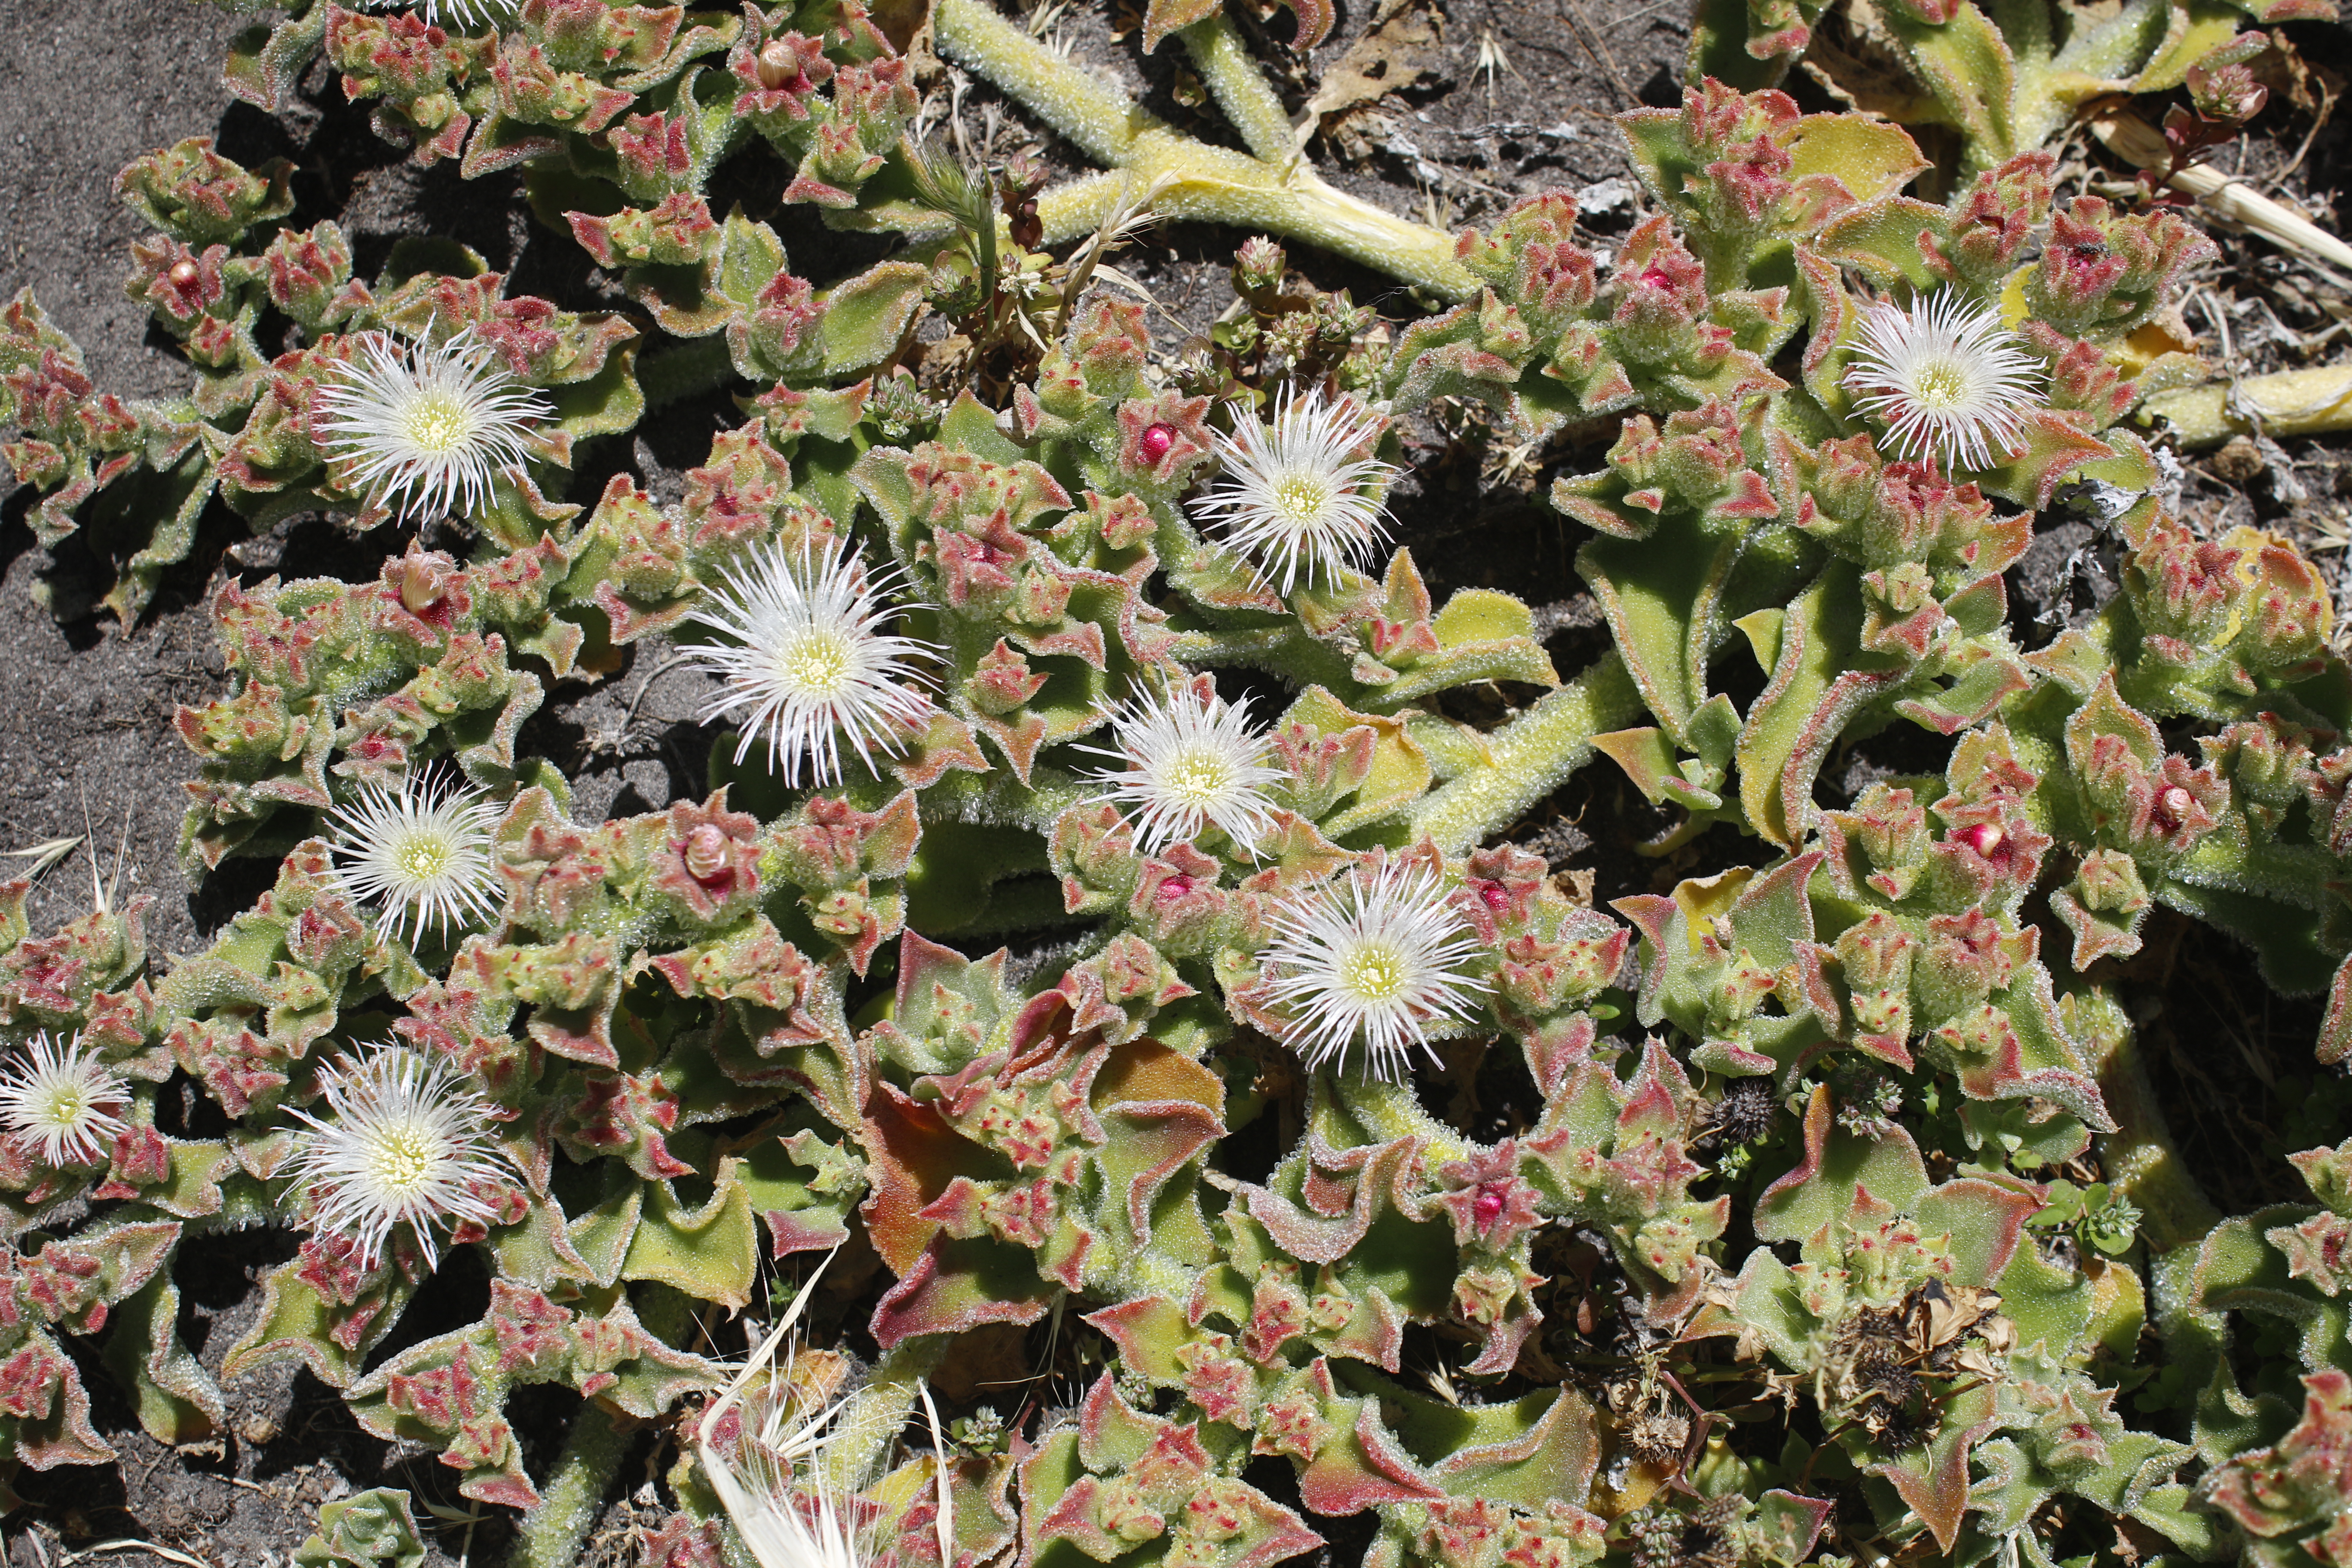 Ice plant – delicate but an introduced weed from South Africa.